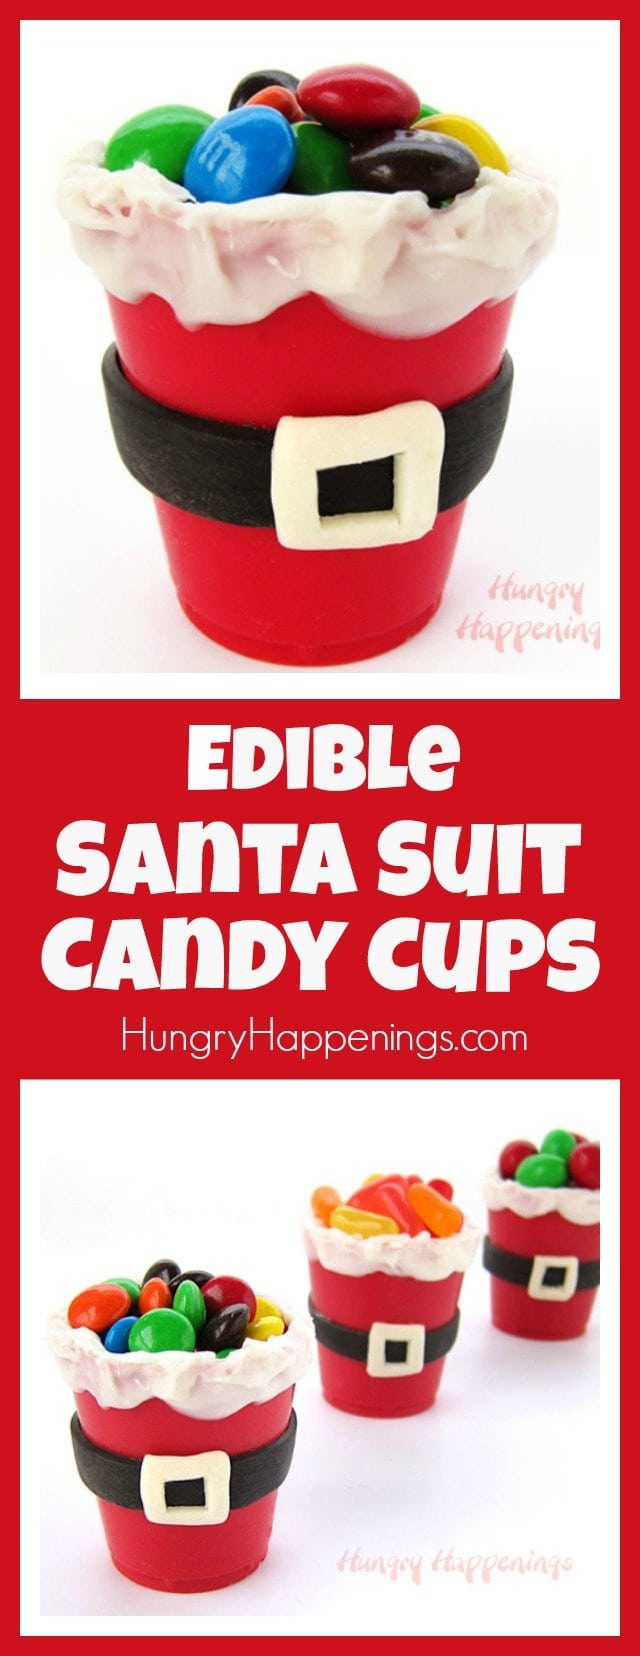 Add a touch of whimsy to your Christmas treats this holiday by making Edible Santa Suit Candy Cups. You can fill them with candies, pudding, chocolate mousse, or nuts.